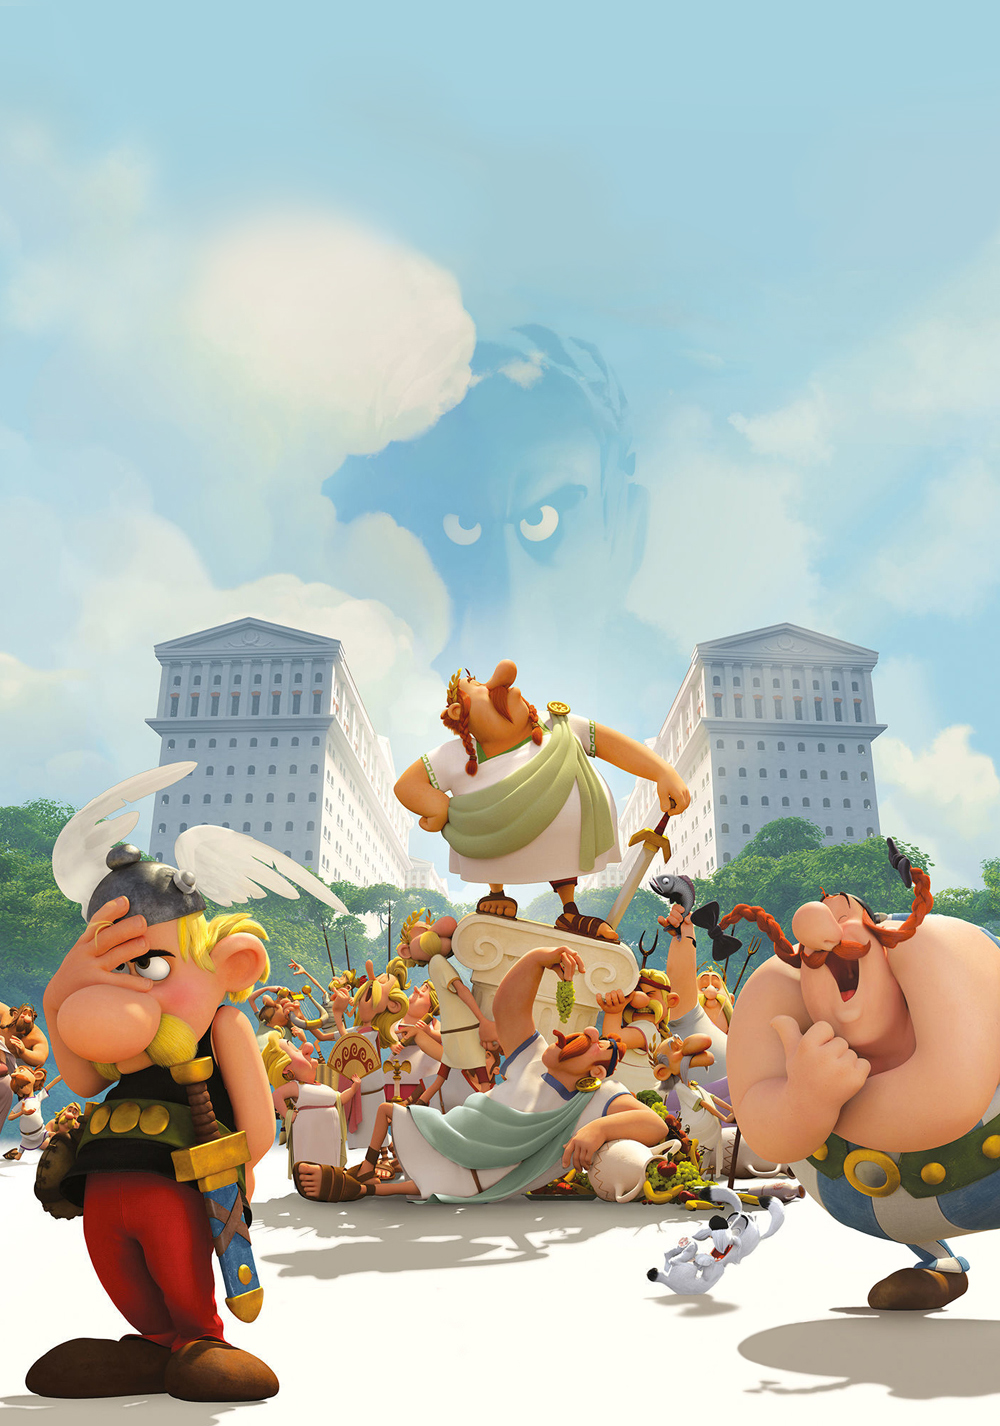 Asterix: The Land of the Gods Picture